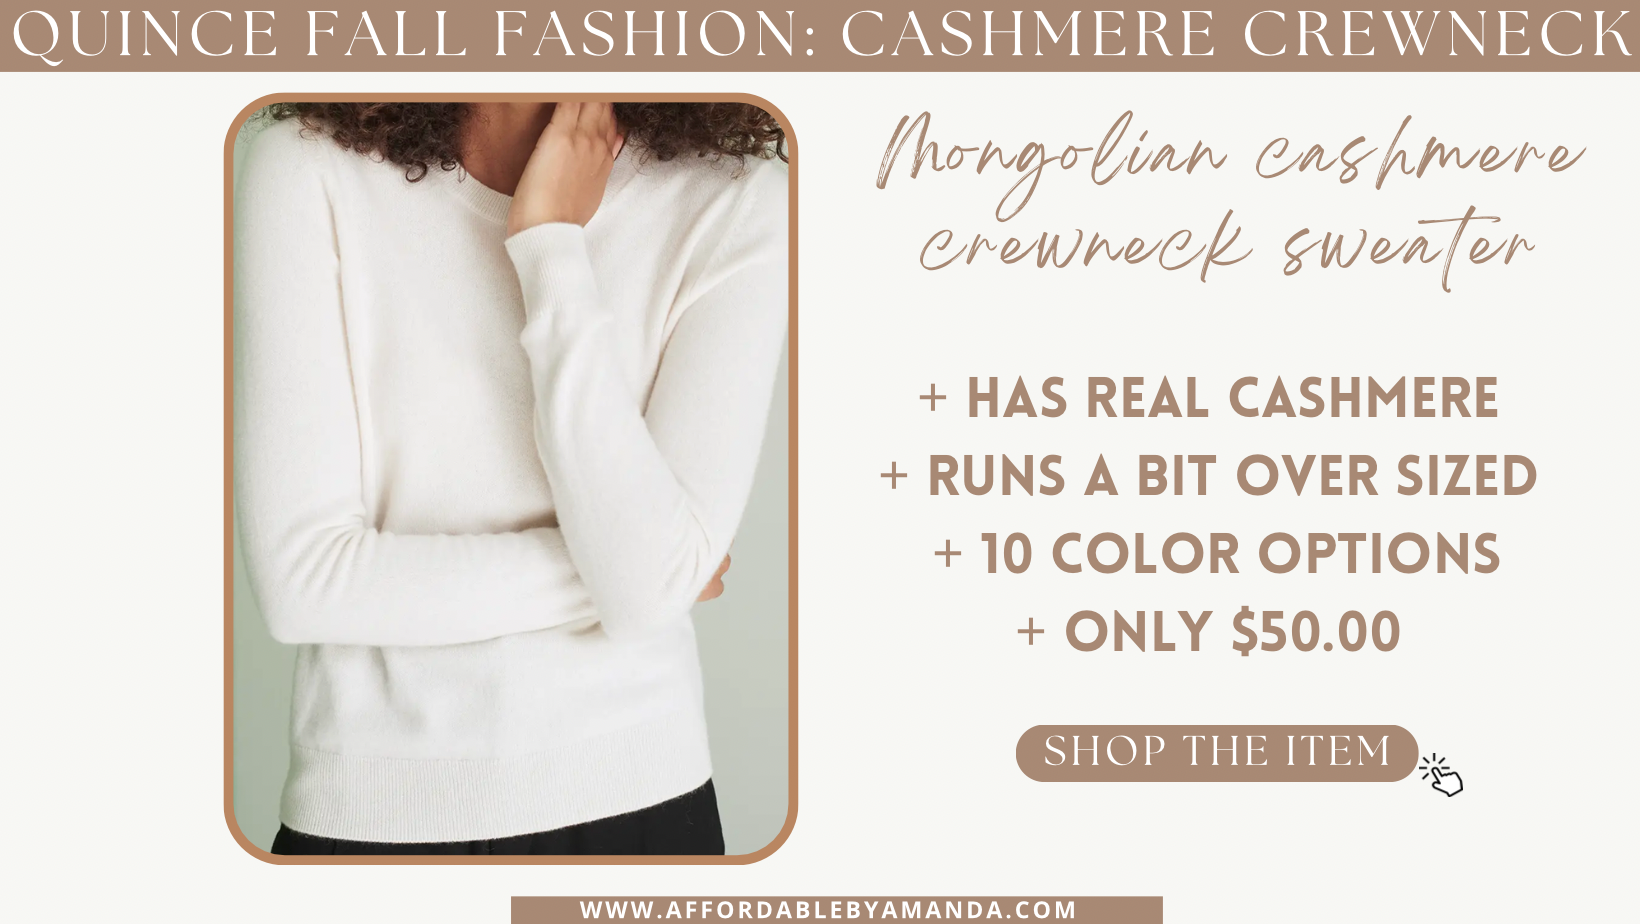 Quince The $50 Cashmere Crewneck Sweater - Quince Fall Fashion Finds - Affordable by Amanda